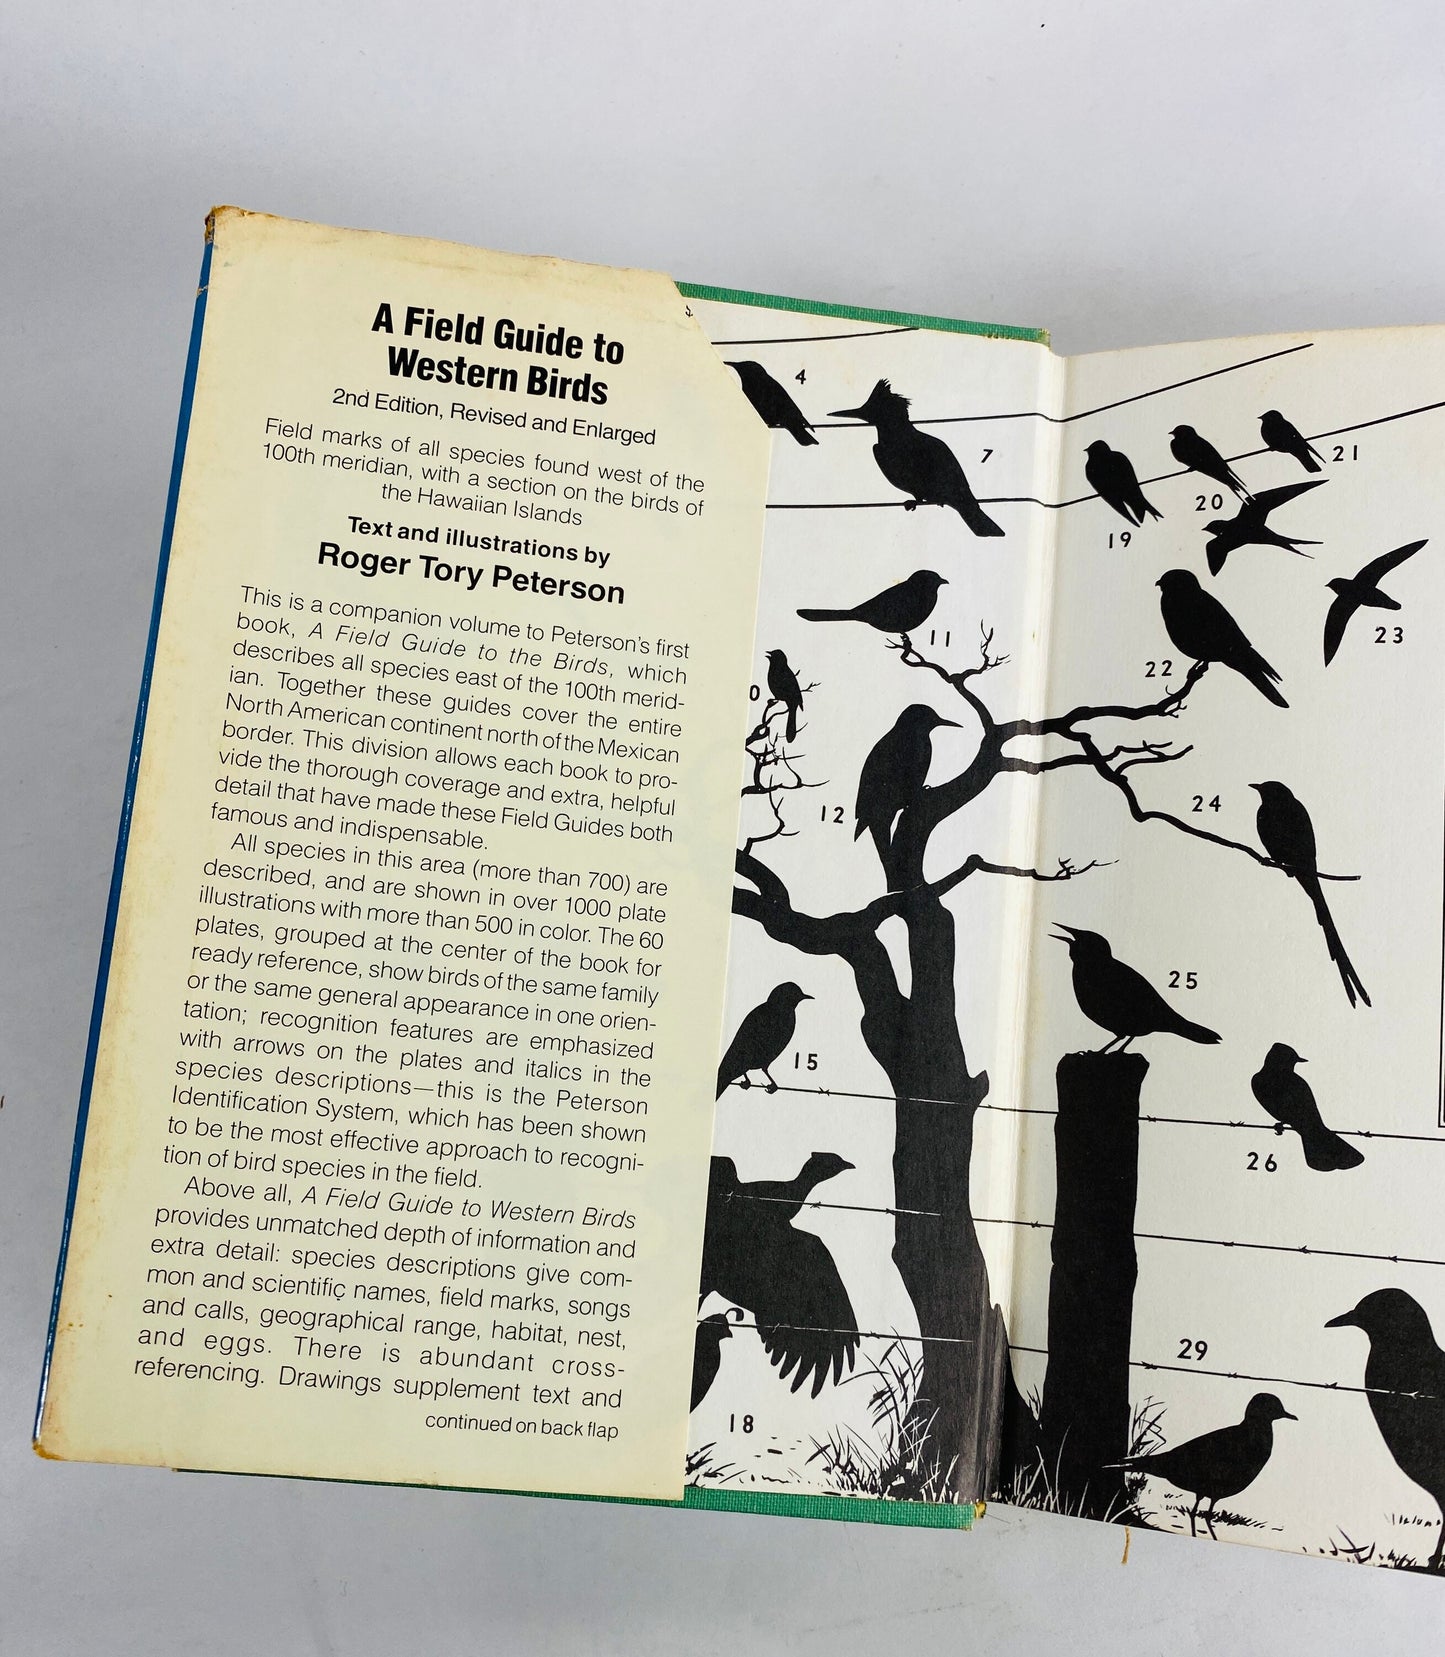 1978 Western Birds Field Guide to Identification by Roger Tory Peterson. Vintage book National Audubon Society